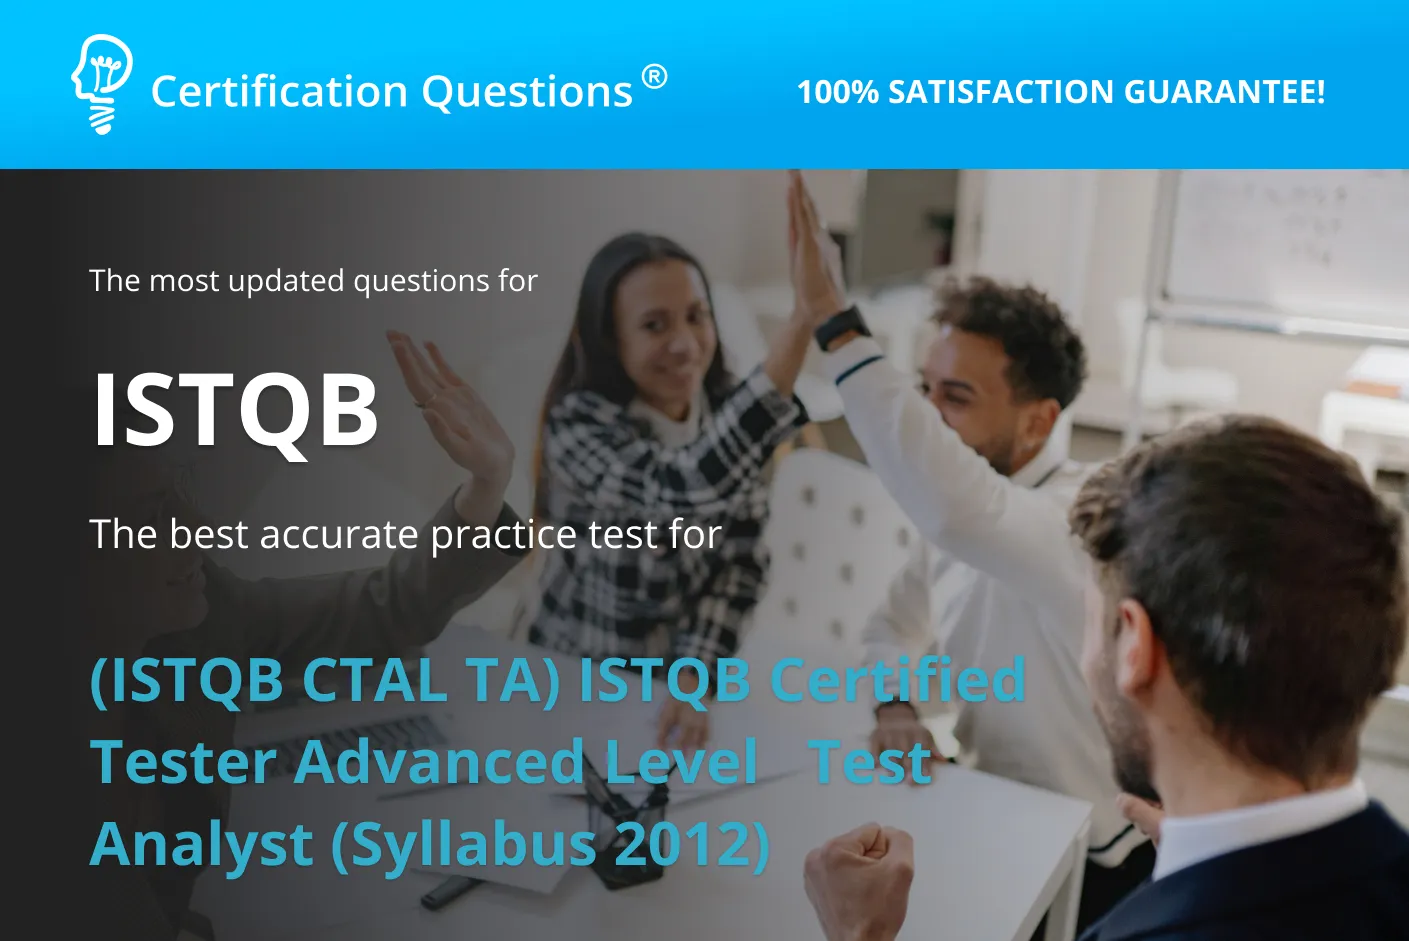 istqb certified tester advanced level test analyst practice test